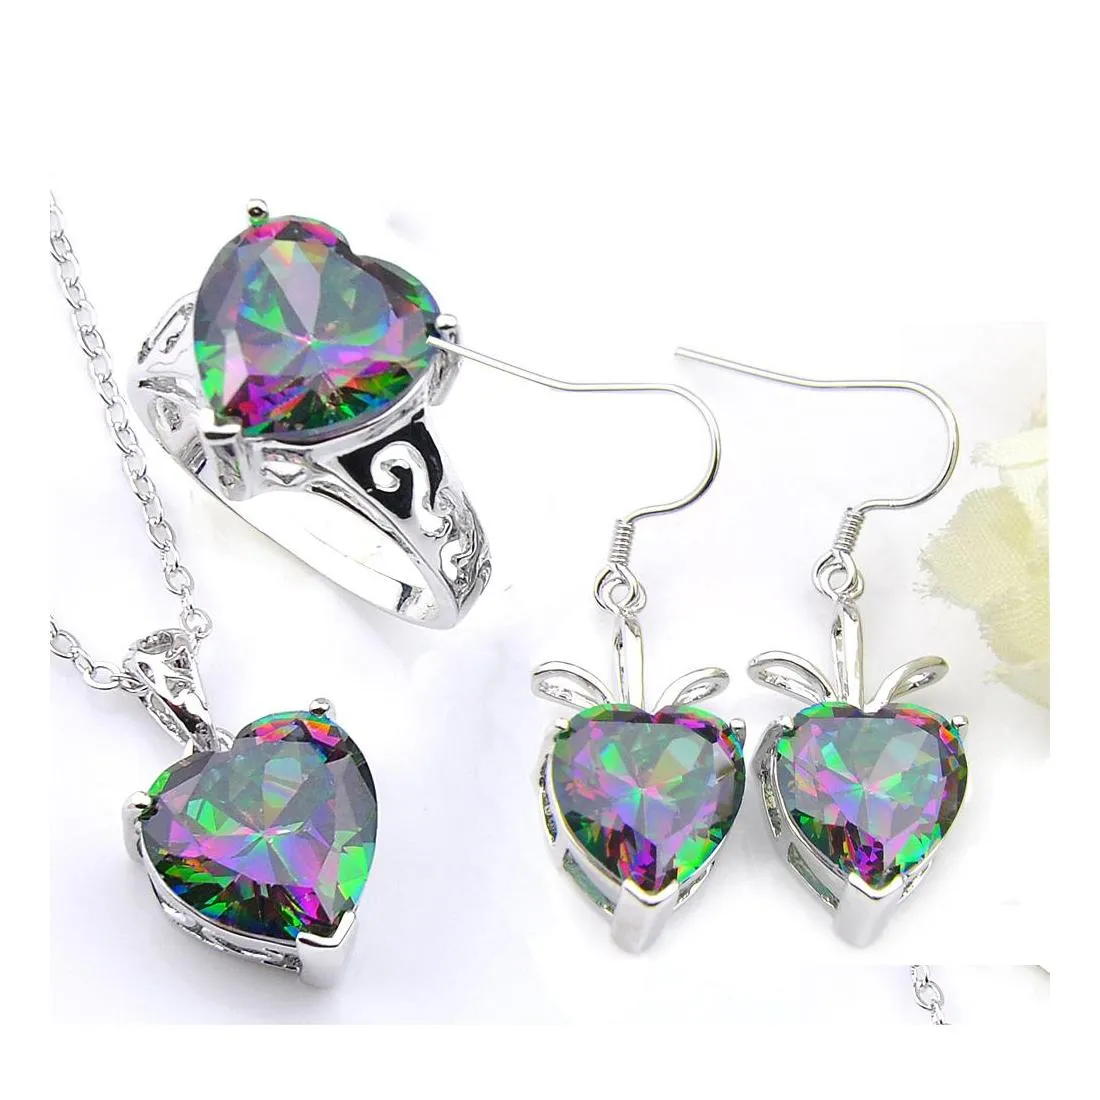 Andra smyckesupps￤ttningar LuckyShine Valentines Day Gift Fire Rainbow Heart Mystic Topaz 925 Sterling Sier Rings h￤ngen ￶rh￤ngen Set Wome Dhcqx